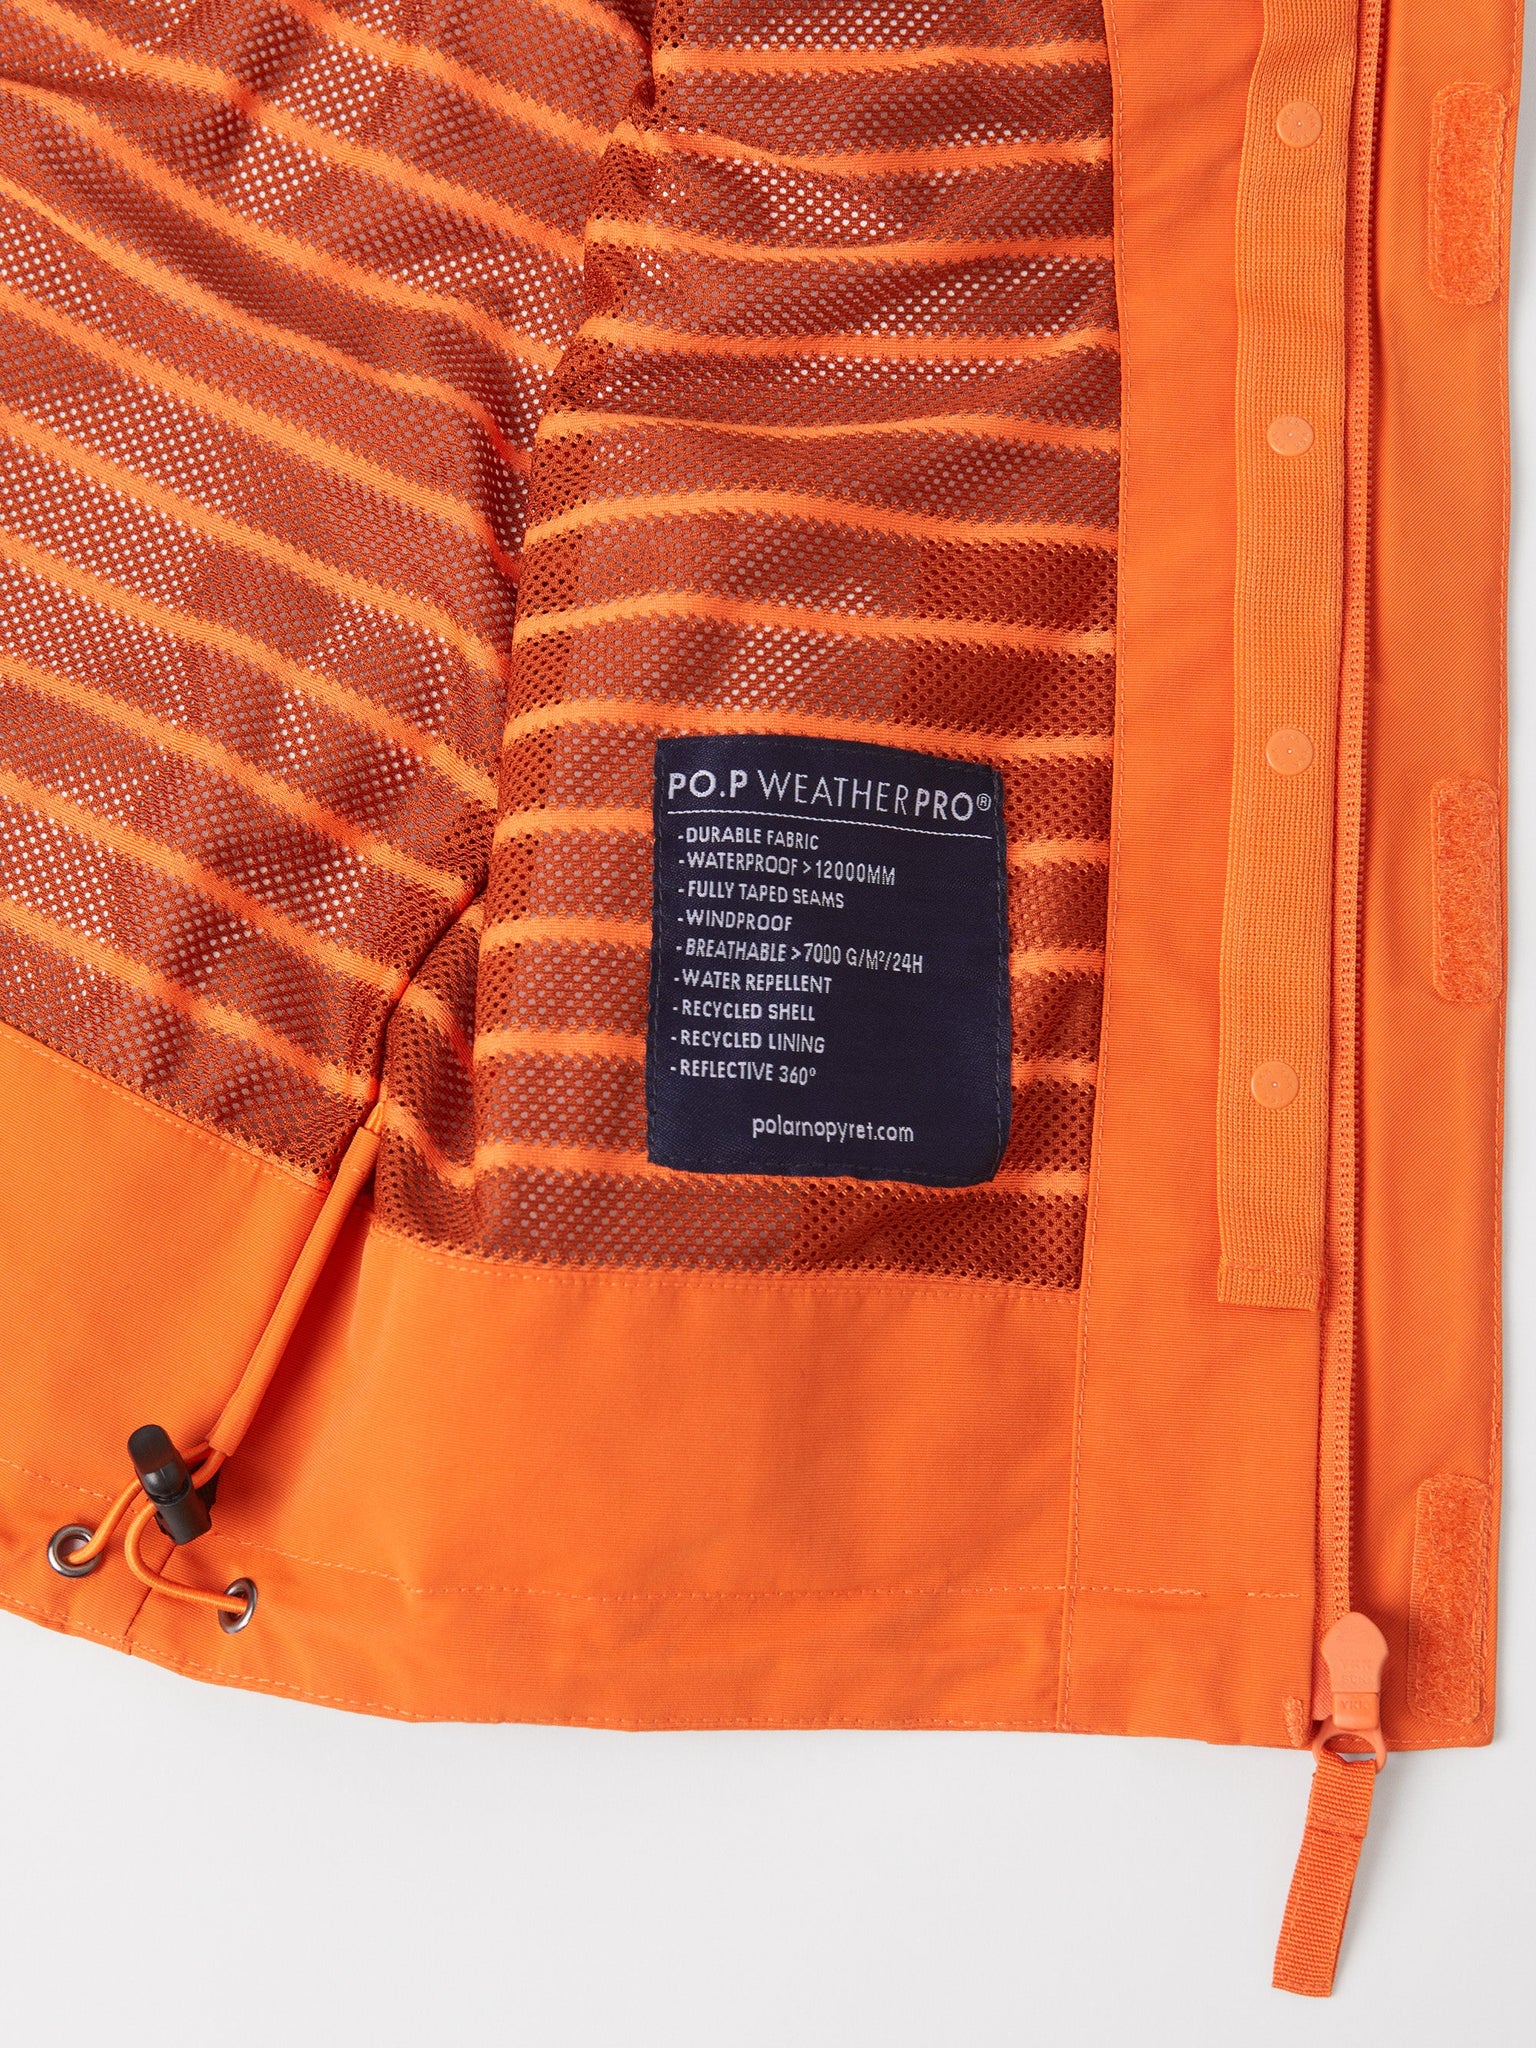 Kids Orange Waterproof Shell Jacket from the Polarn O. Pyret outerwear collection. Kids outerwear made from sustainably source materials